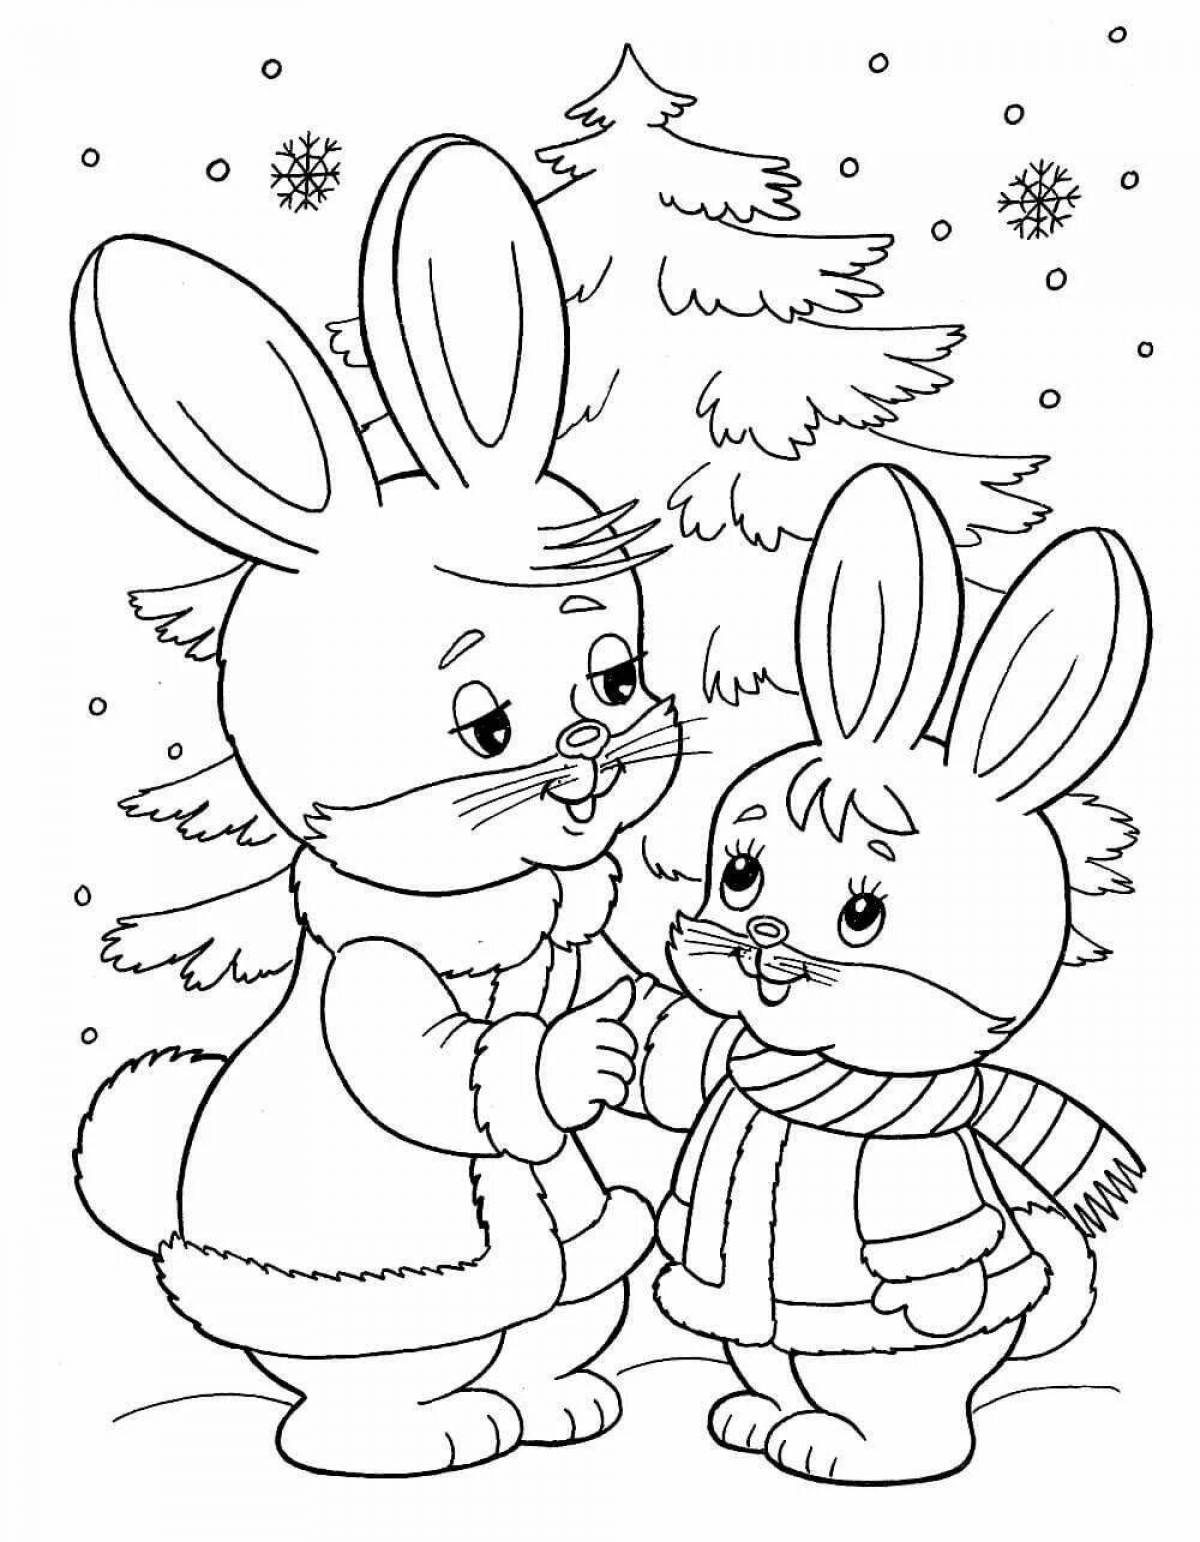 Stylish winter Christmas coloring book